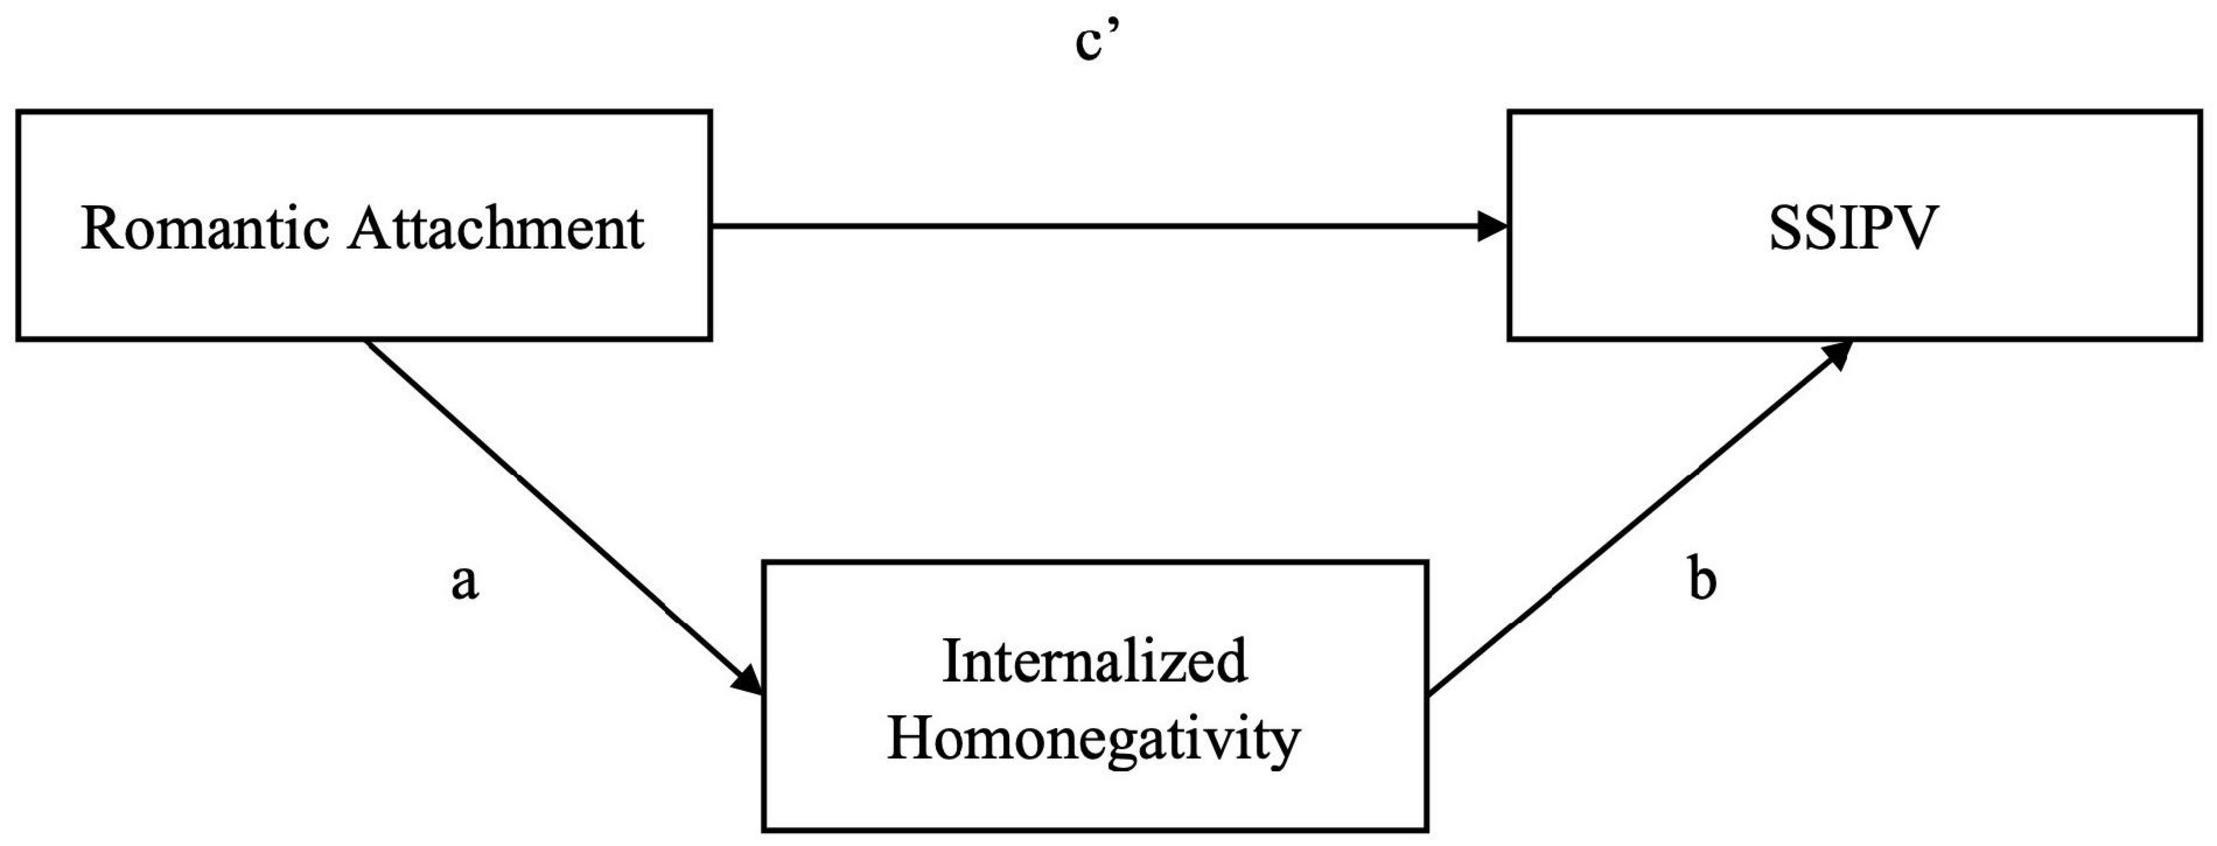 Frontiers Romantic Attachment, Internalized Homonegativity, and Same-Sex Intimate Partner Violence Perpetration Among Lesbian Women in Italy